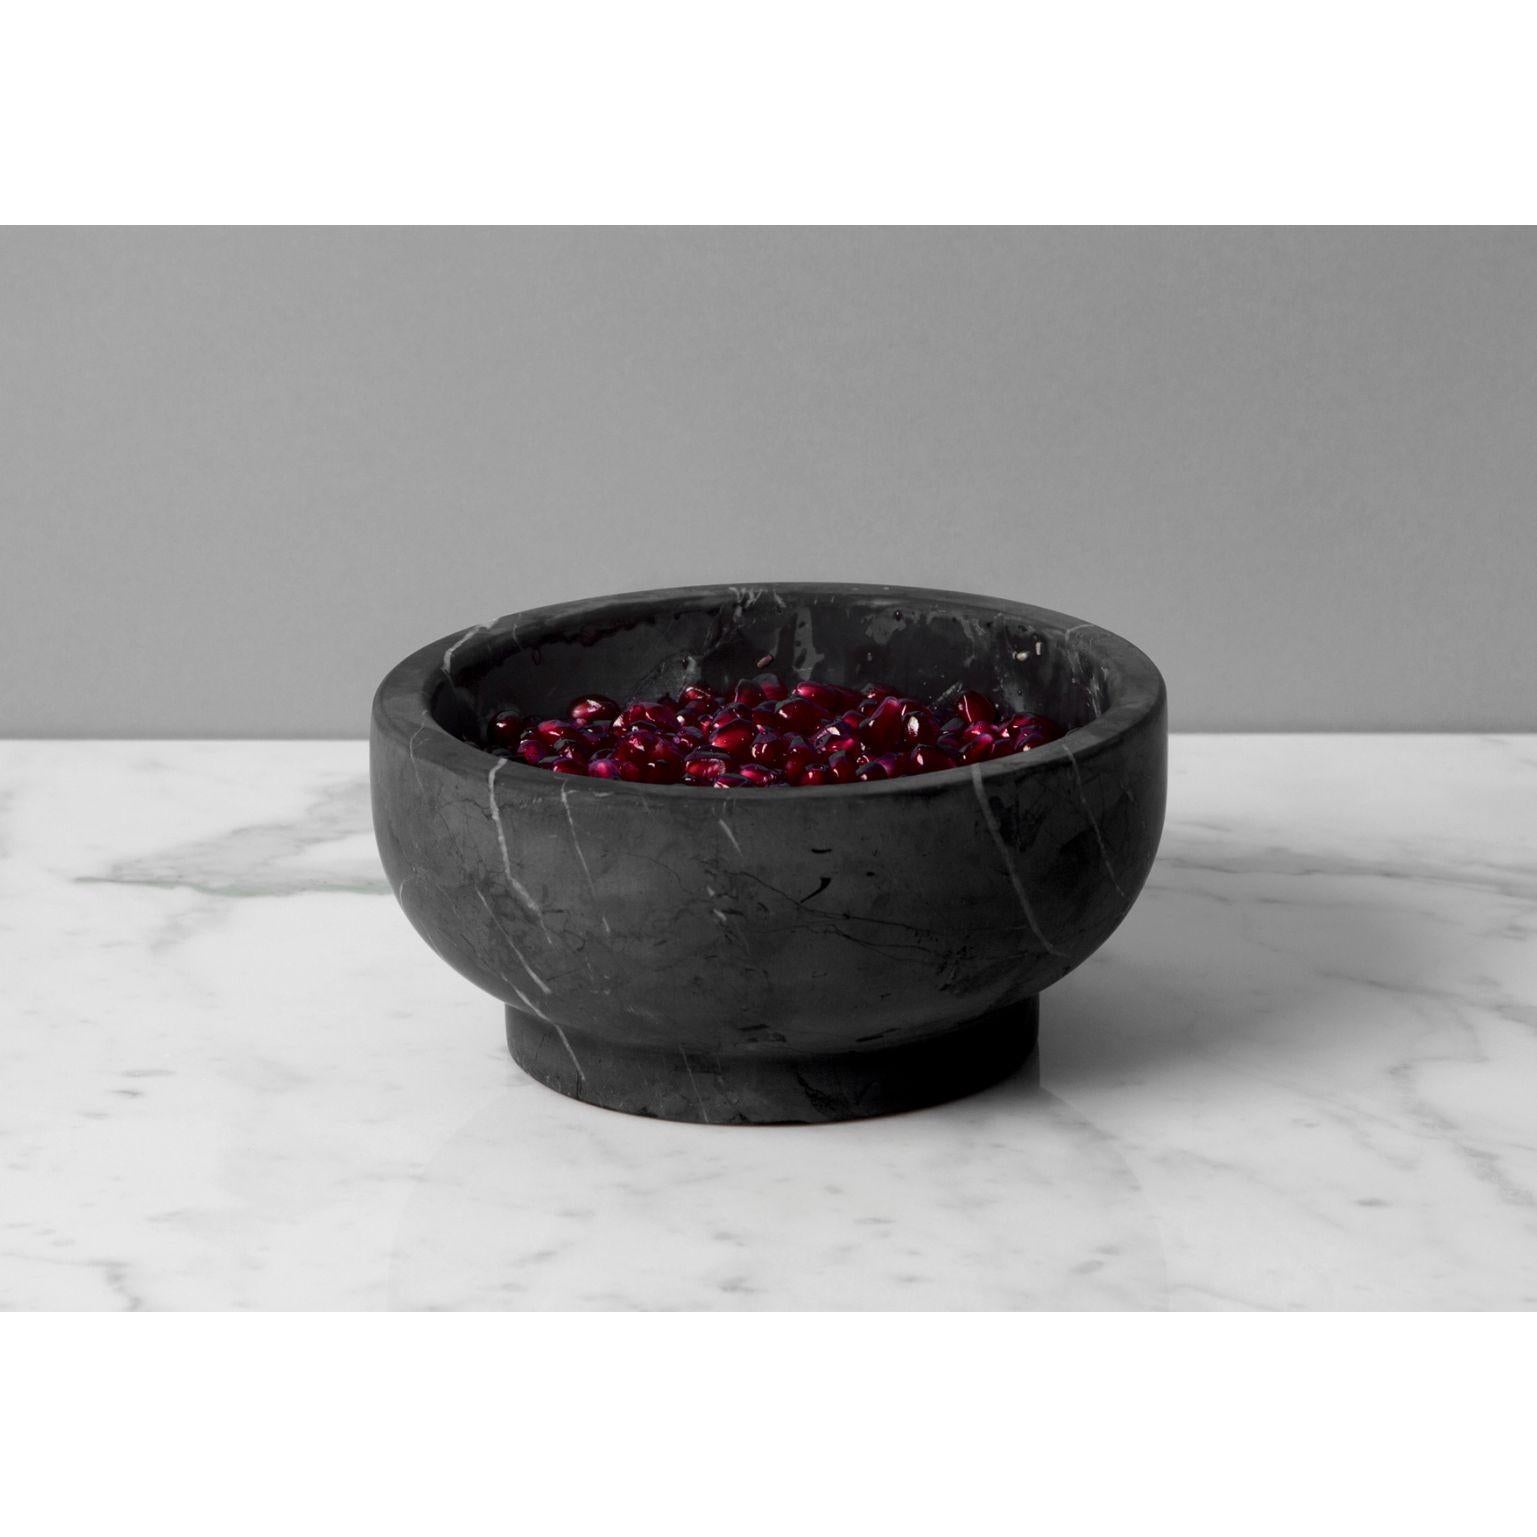 Set of 2 Memory Bowls, Black & Red by Cristoforo Trapani For Sale 4